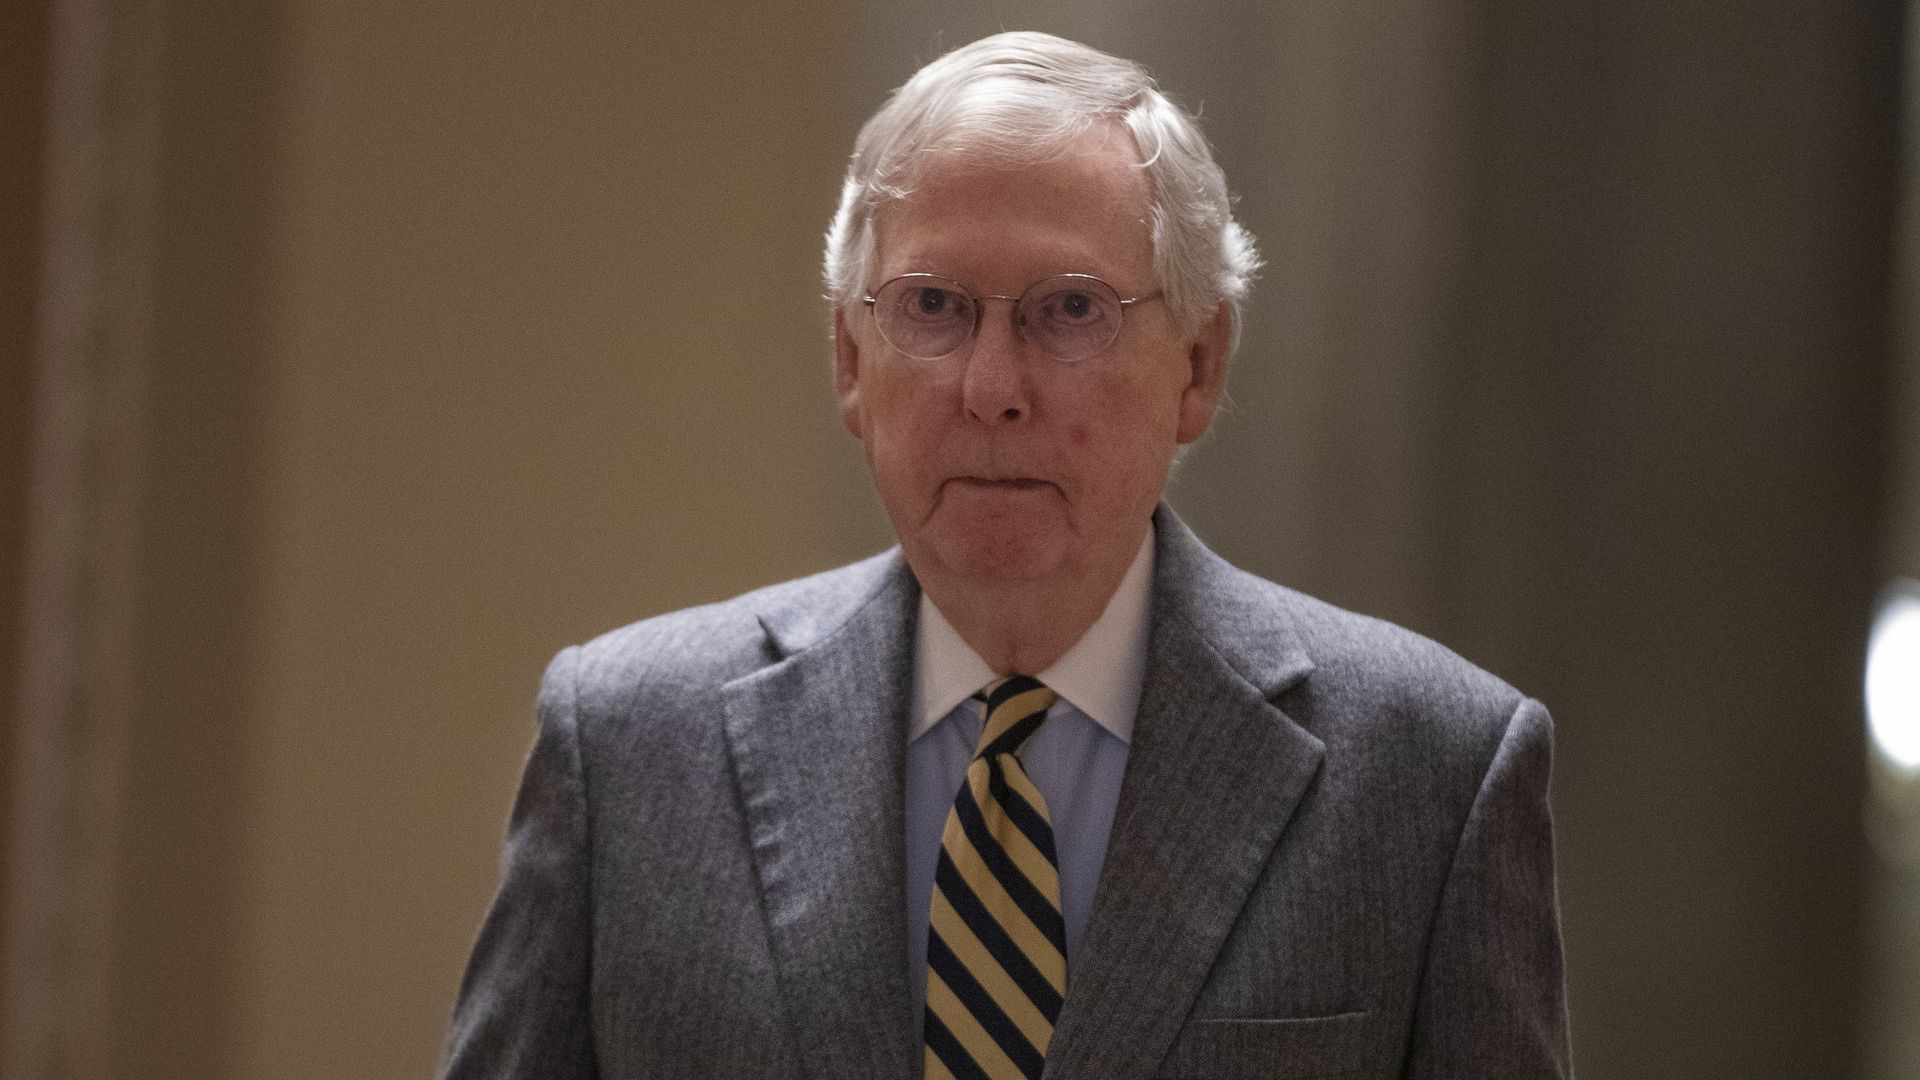 Senate Majority Leader Mitch McConnell walks down a hallway at the Capitol